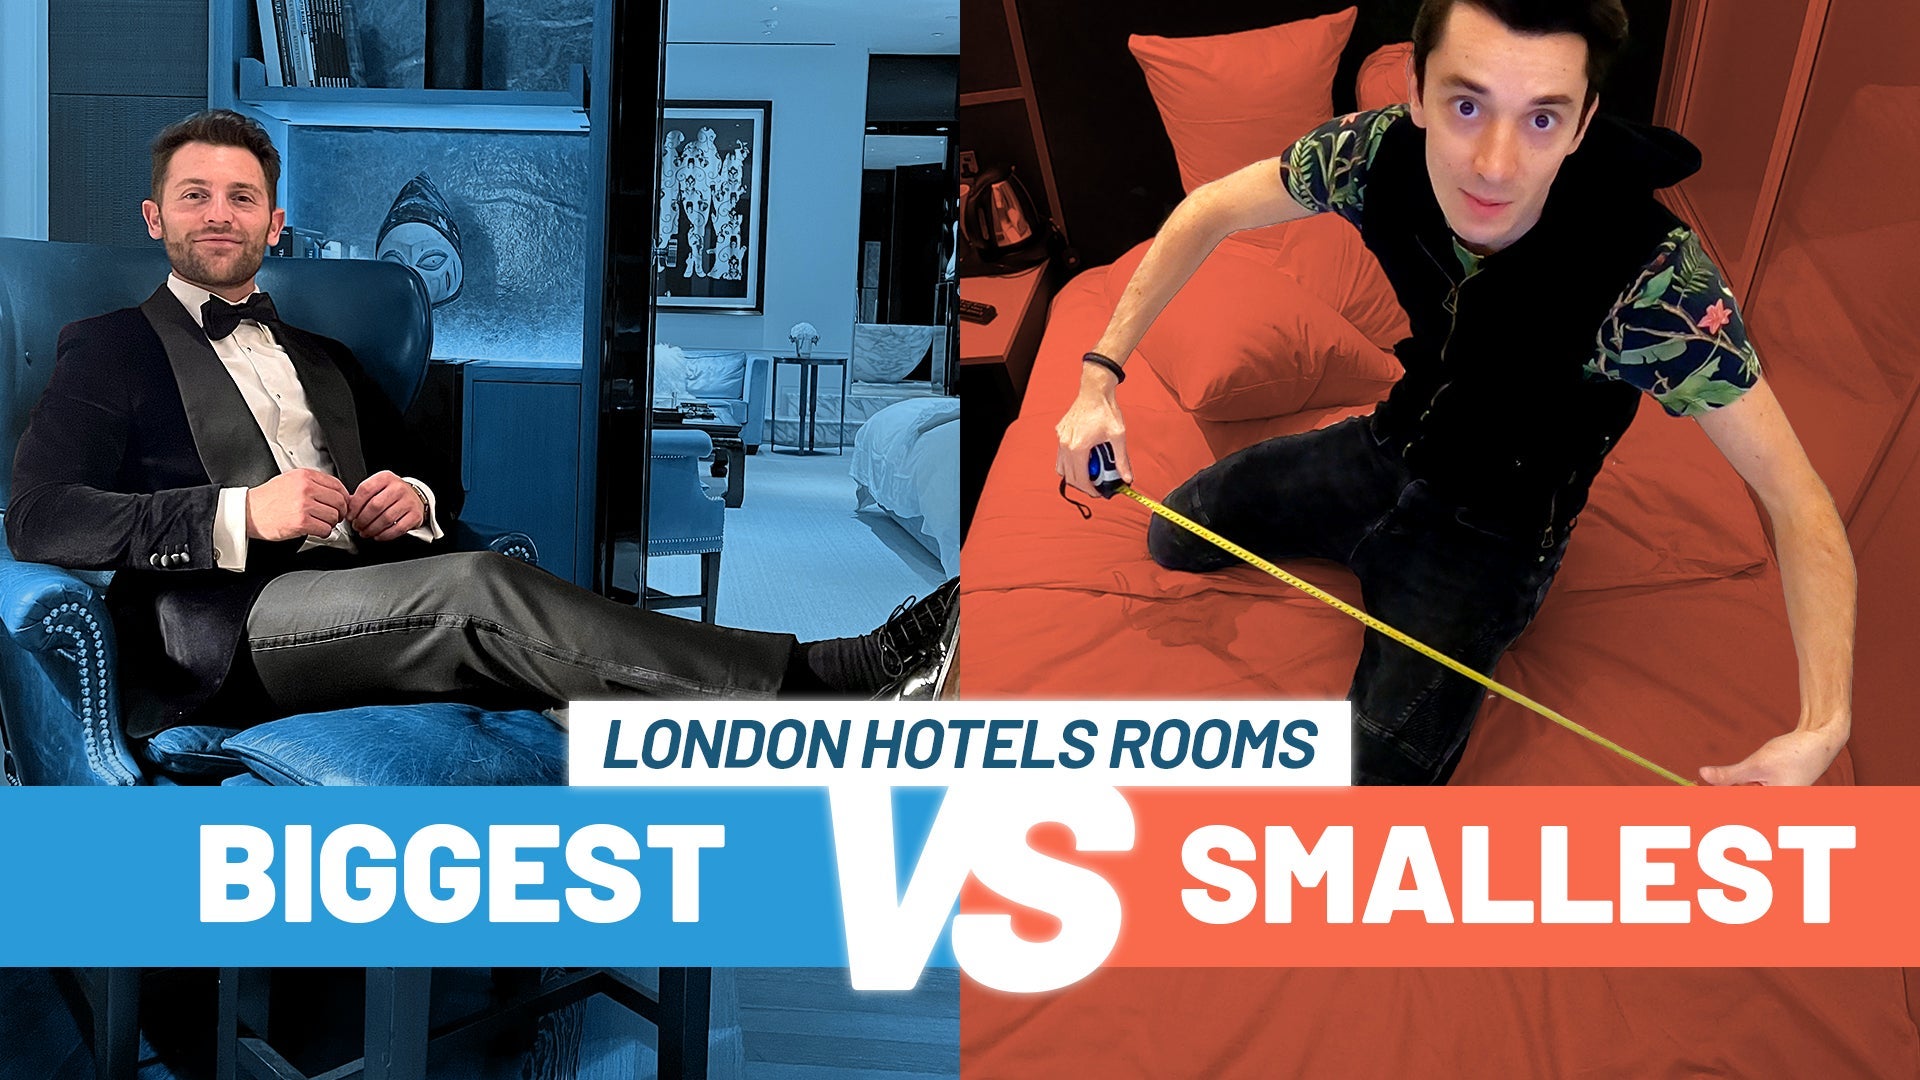 Watch TPG UK compare London’s biggest vs. smallest hotel rooms - The Points Guy